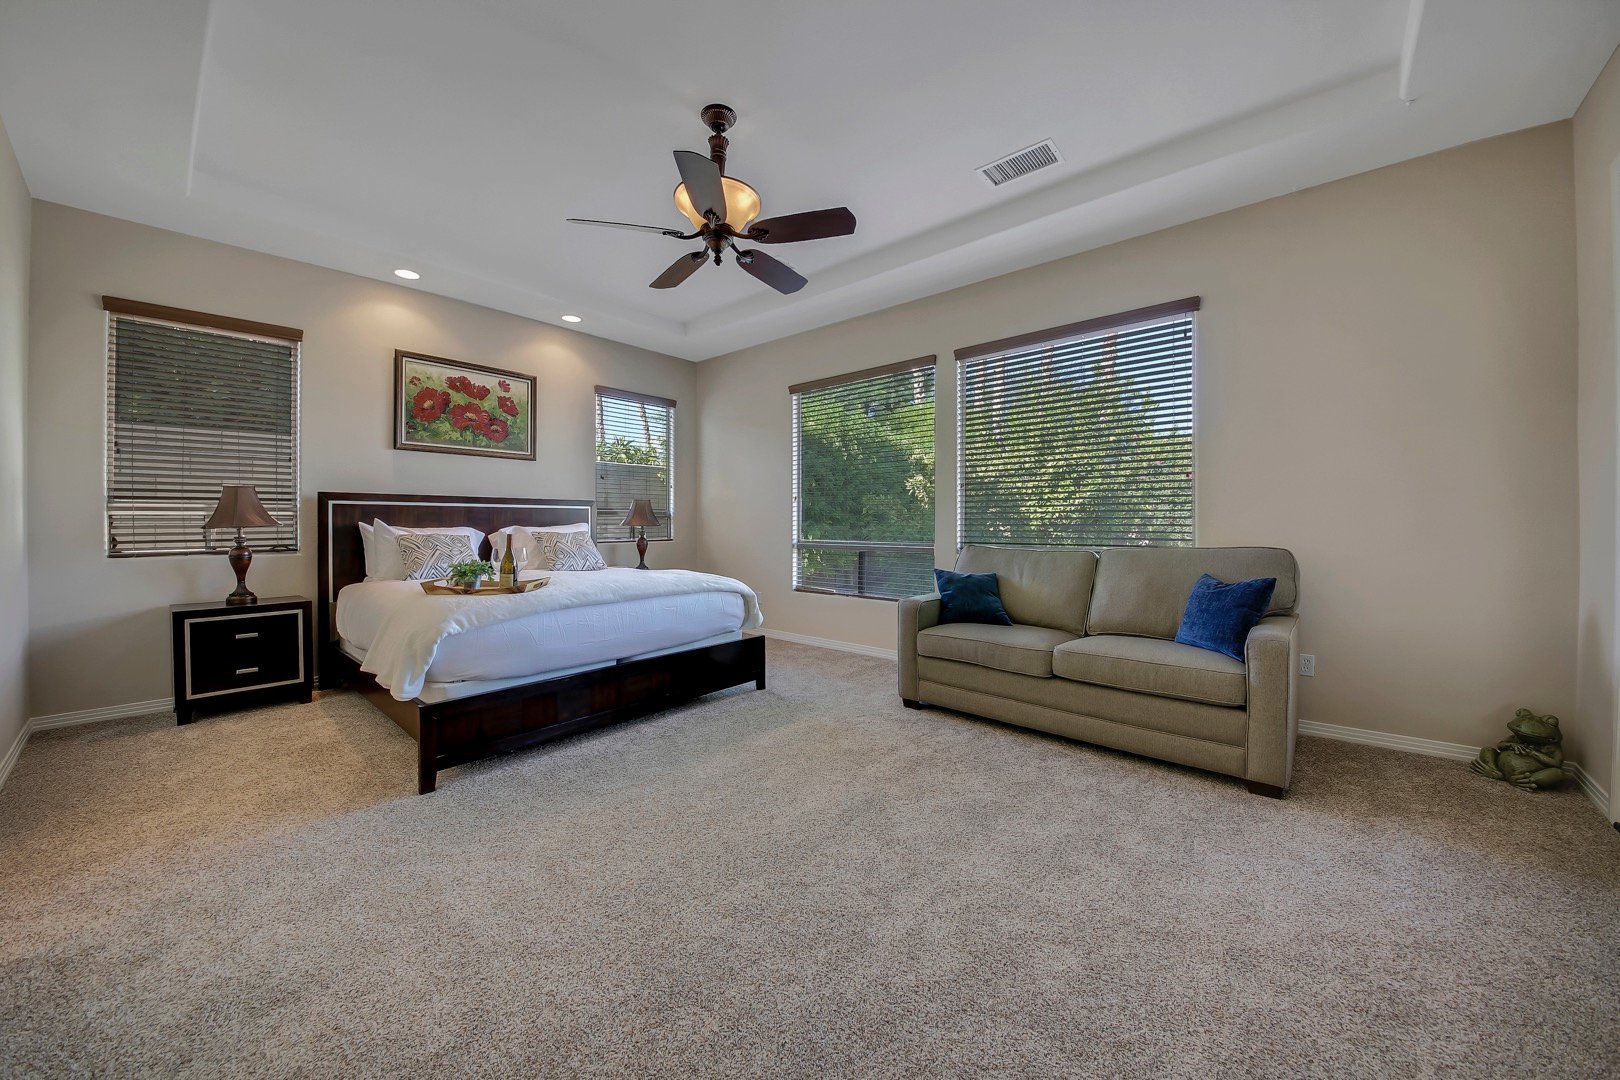 Master Suite 1 features a Cal King-sized Bed, Full-sized Sofa Sleeper, and access to the back patio.